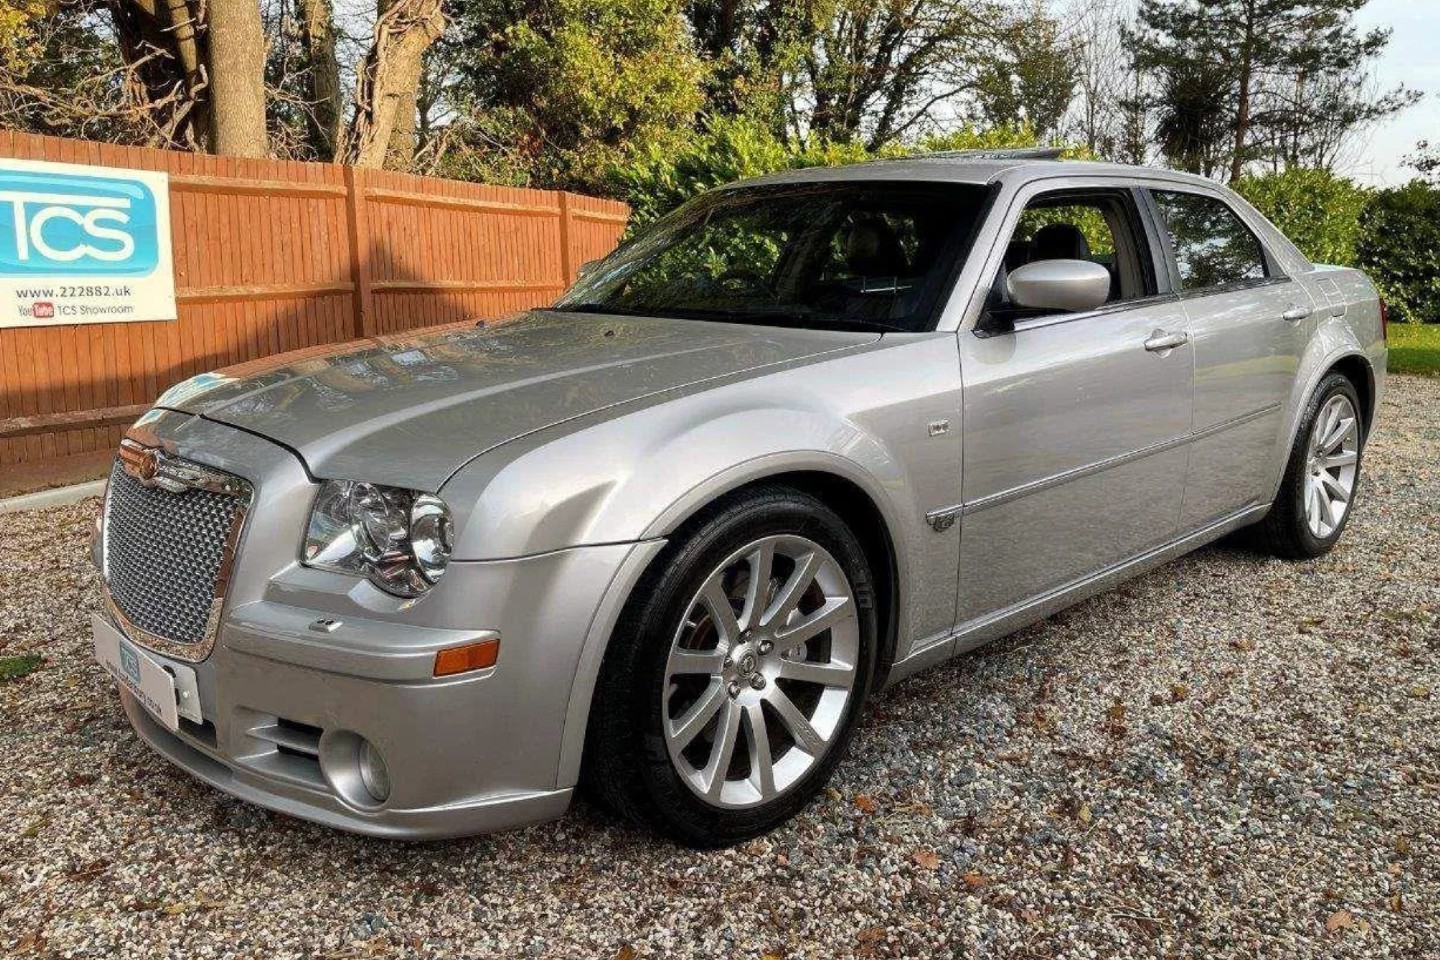 Used Chrysler 300C Touring 2006  2010 mpg costs  reliability  Parkers